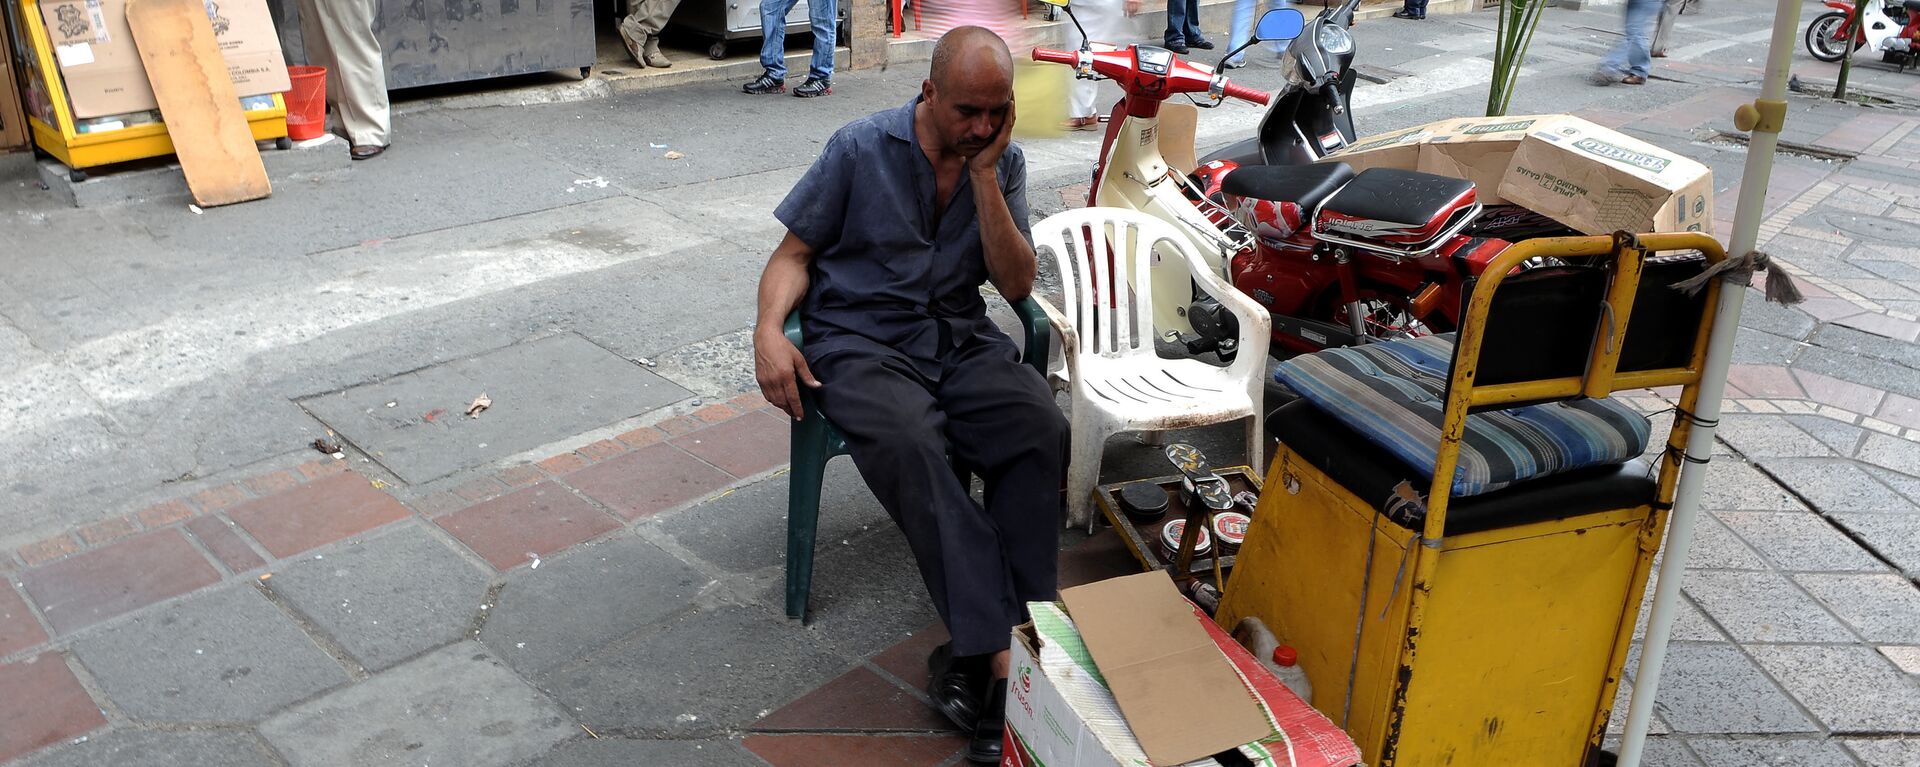 A shoeshiner awaits for customers on May 25, 2010 in Cali, Colombia. - Sputnik Mundo, 1920, 23.02.2021